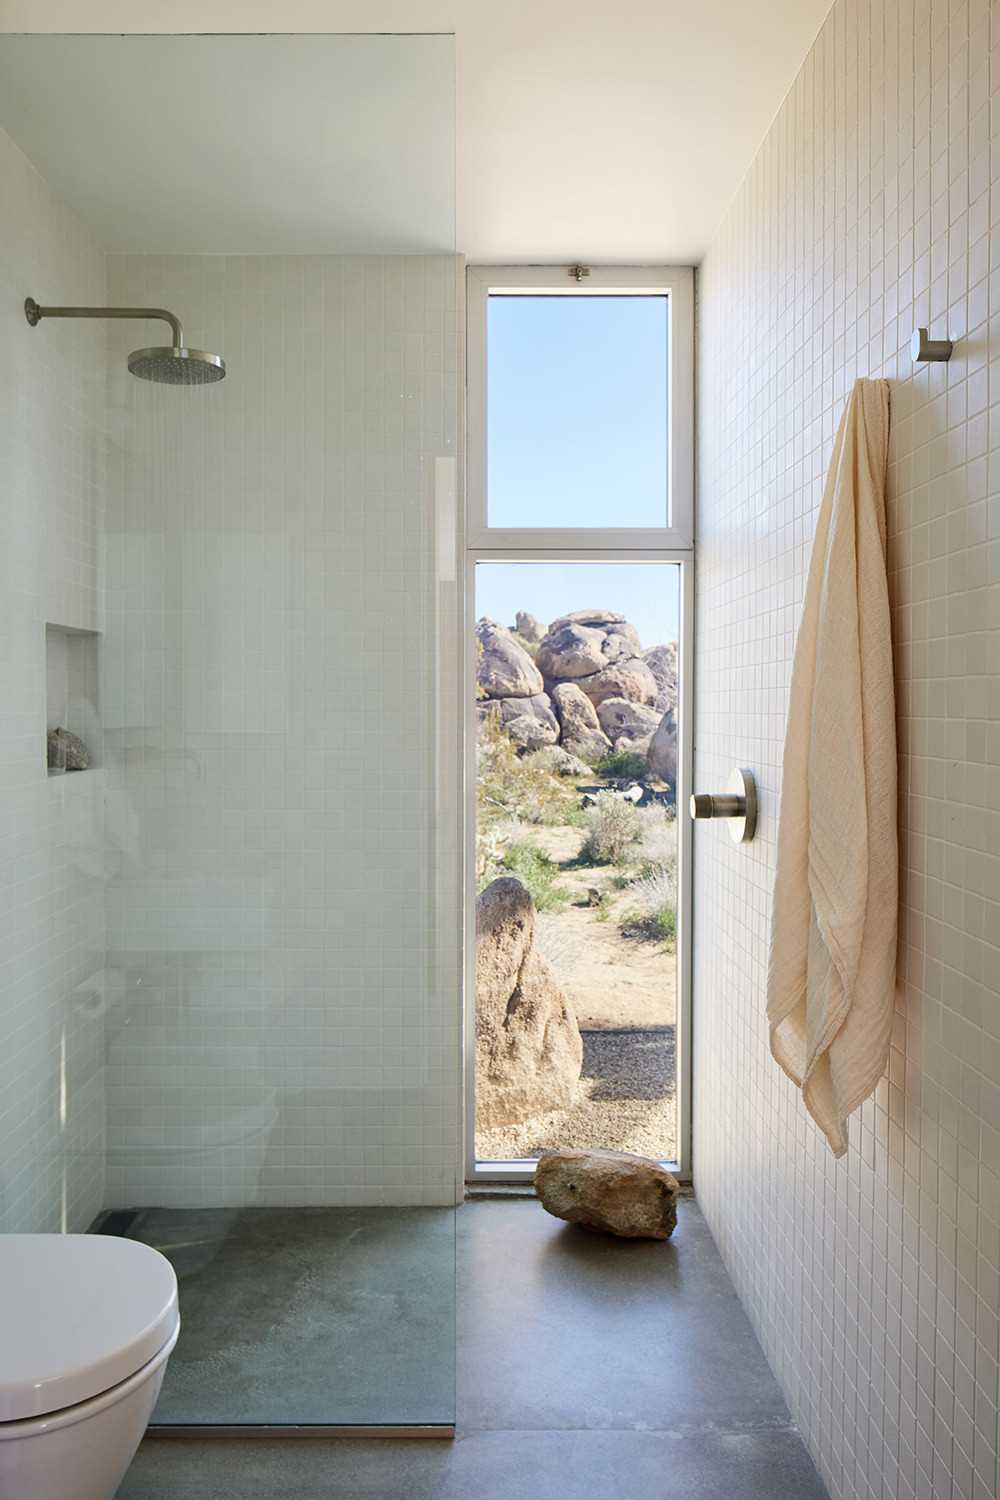 In the bathroom, tiles cover the walls, while a tall vertical window perfectly frames the view.